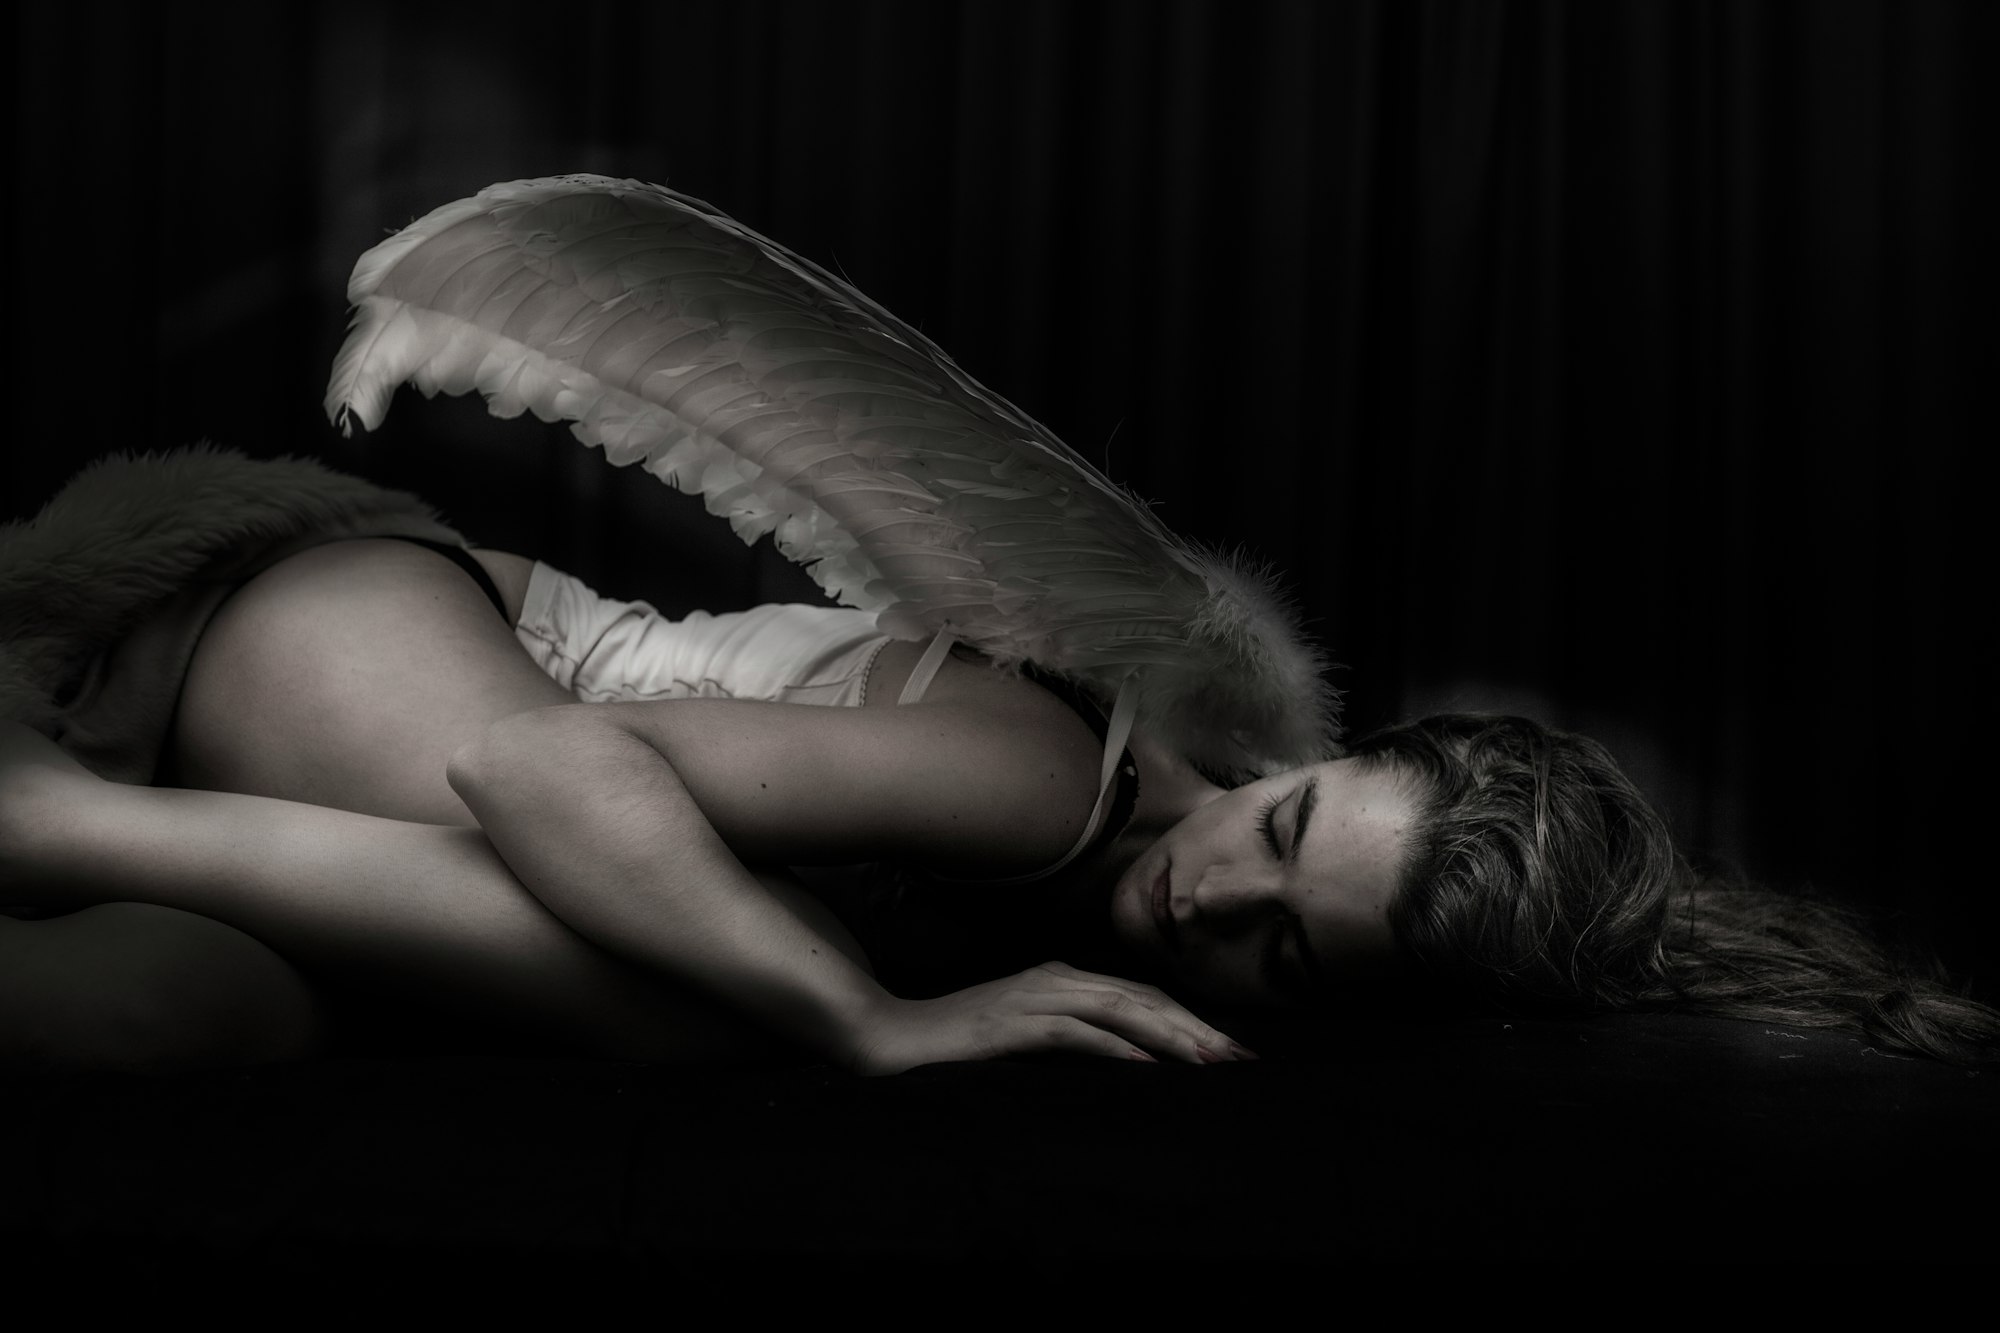 Even Angels need to rest and have a moment of peace.